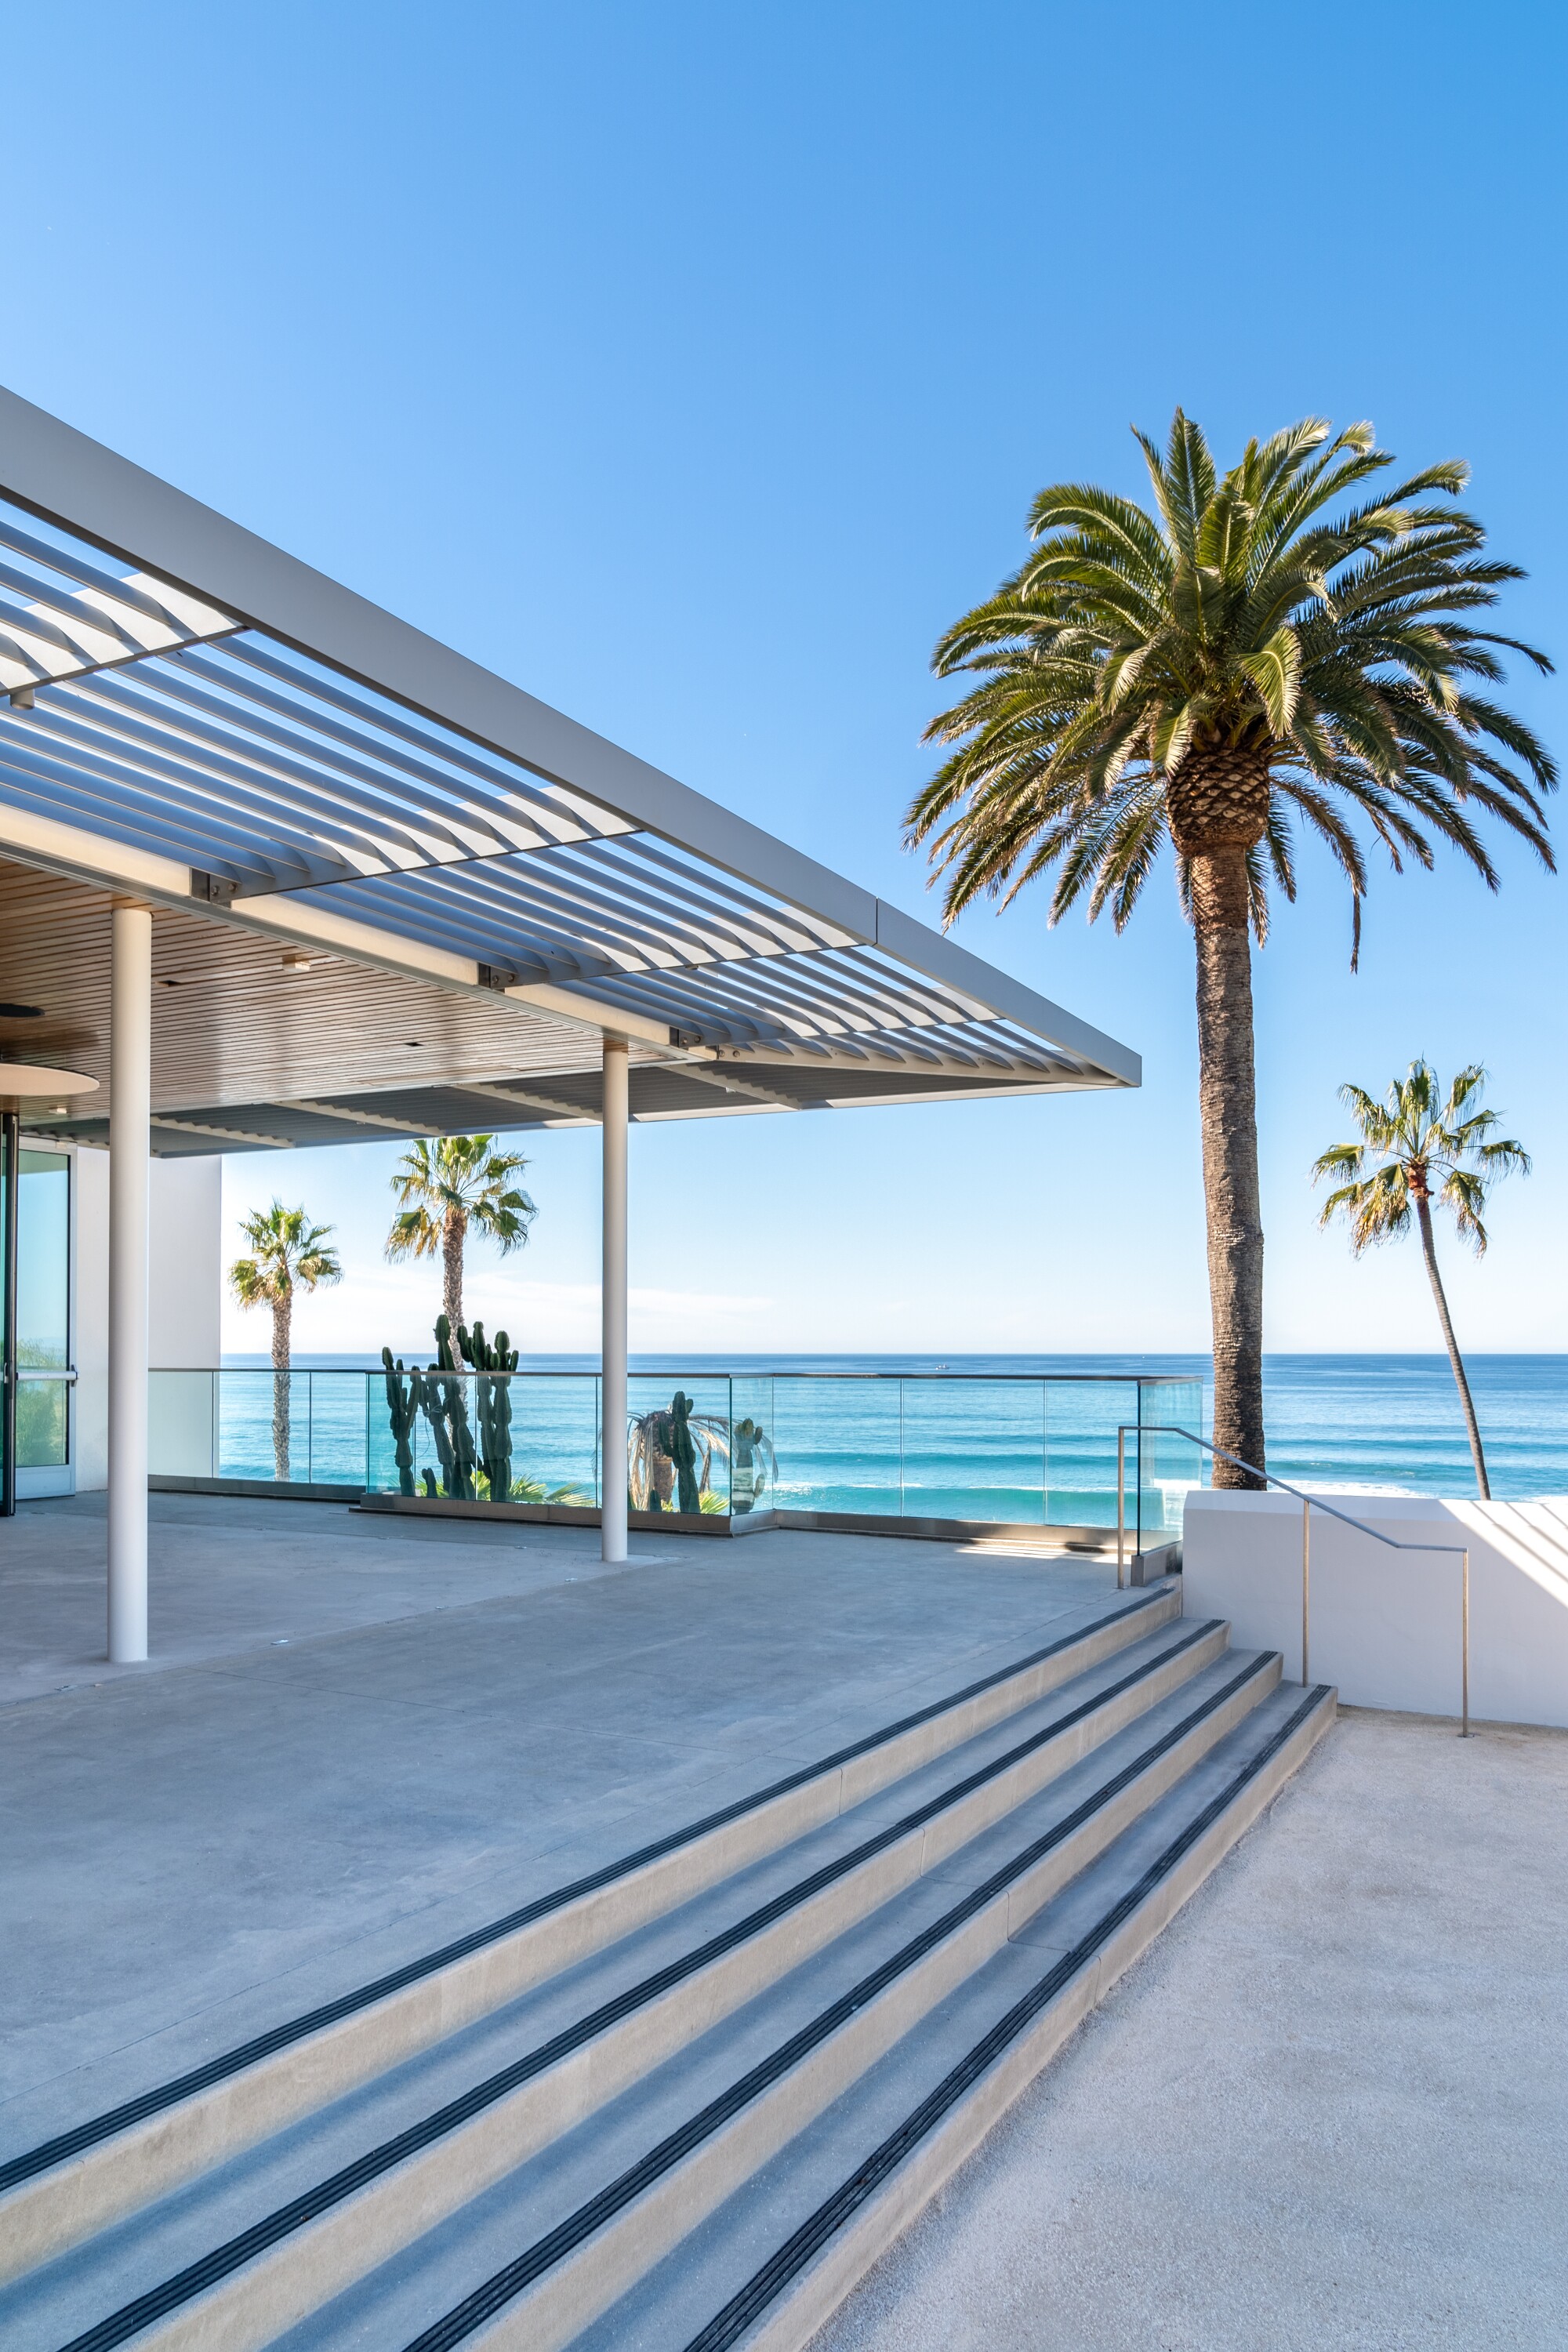 Bartell Terrace at the Museum of Contemporary Art San Diego in La Jolla.